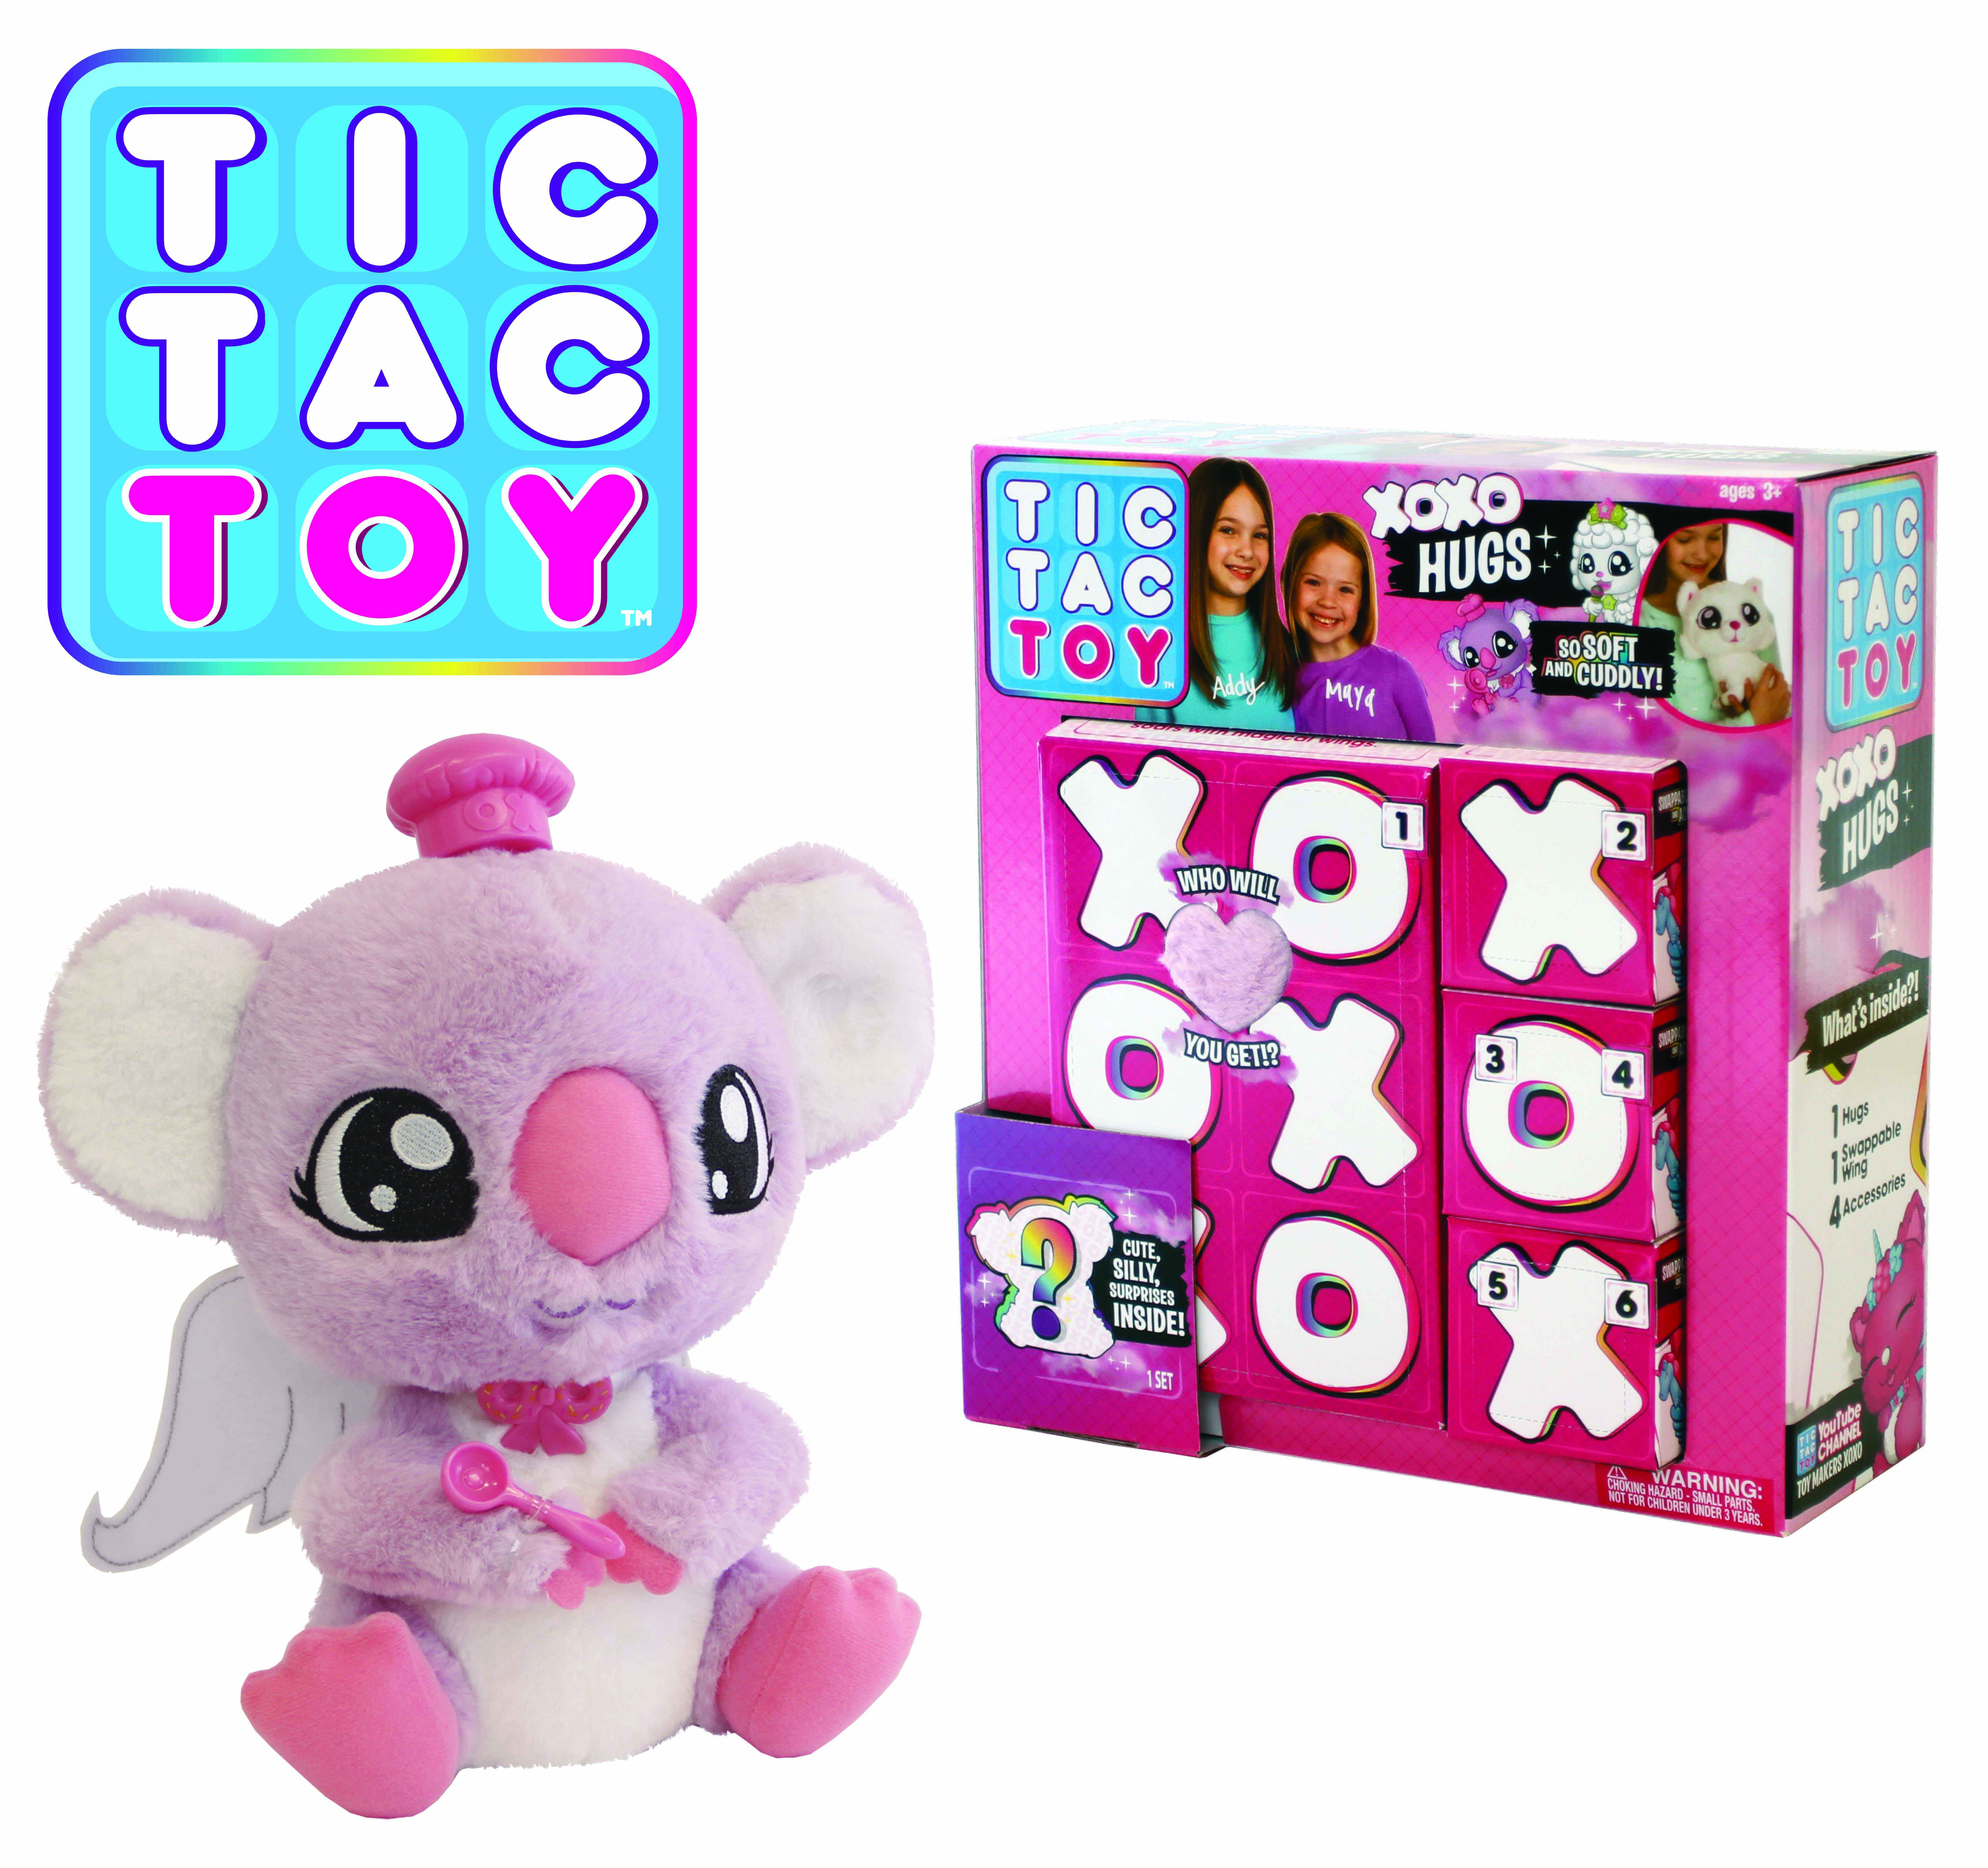 Tic Tac Toy - How many XOXO Friends do you have in your collection? There  are 24 Friends and 24 Glitter Friends to collect! All are available  @Walmart now! Check out our